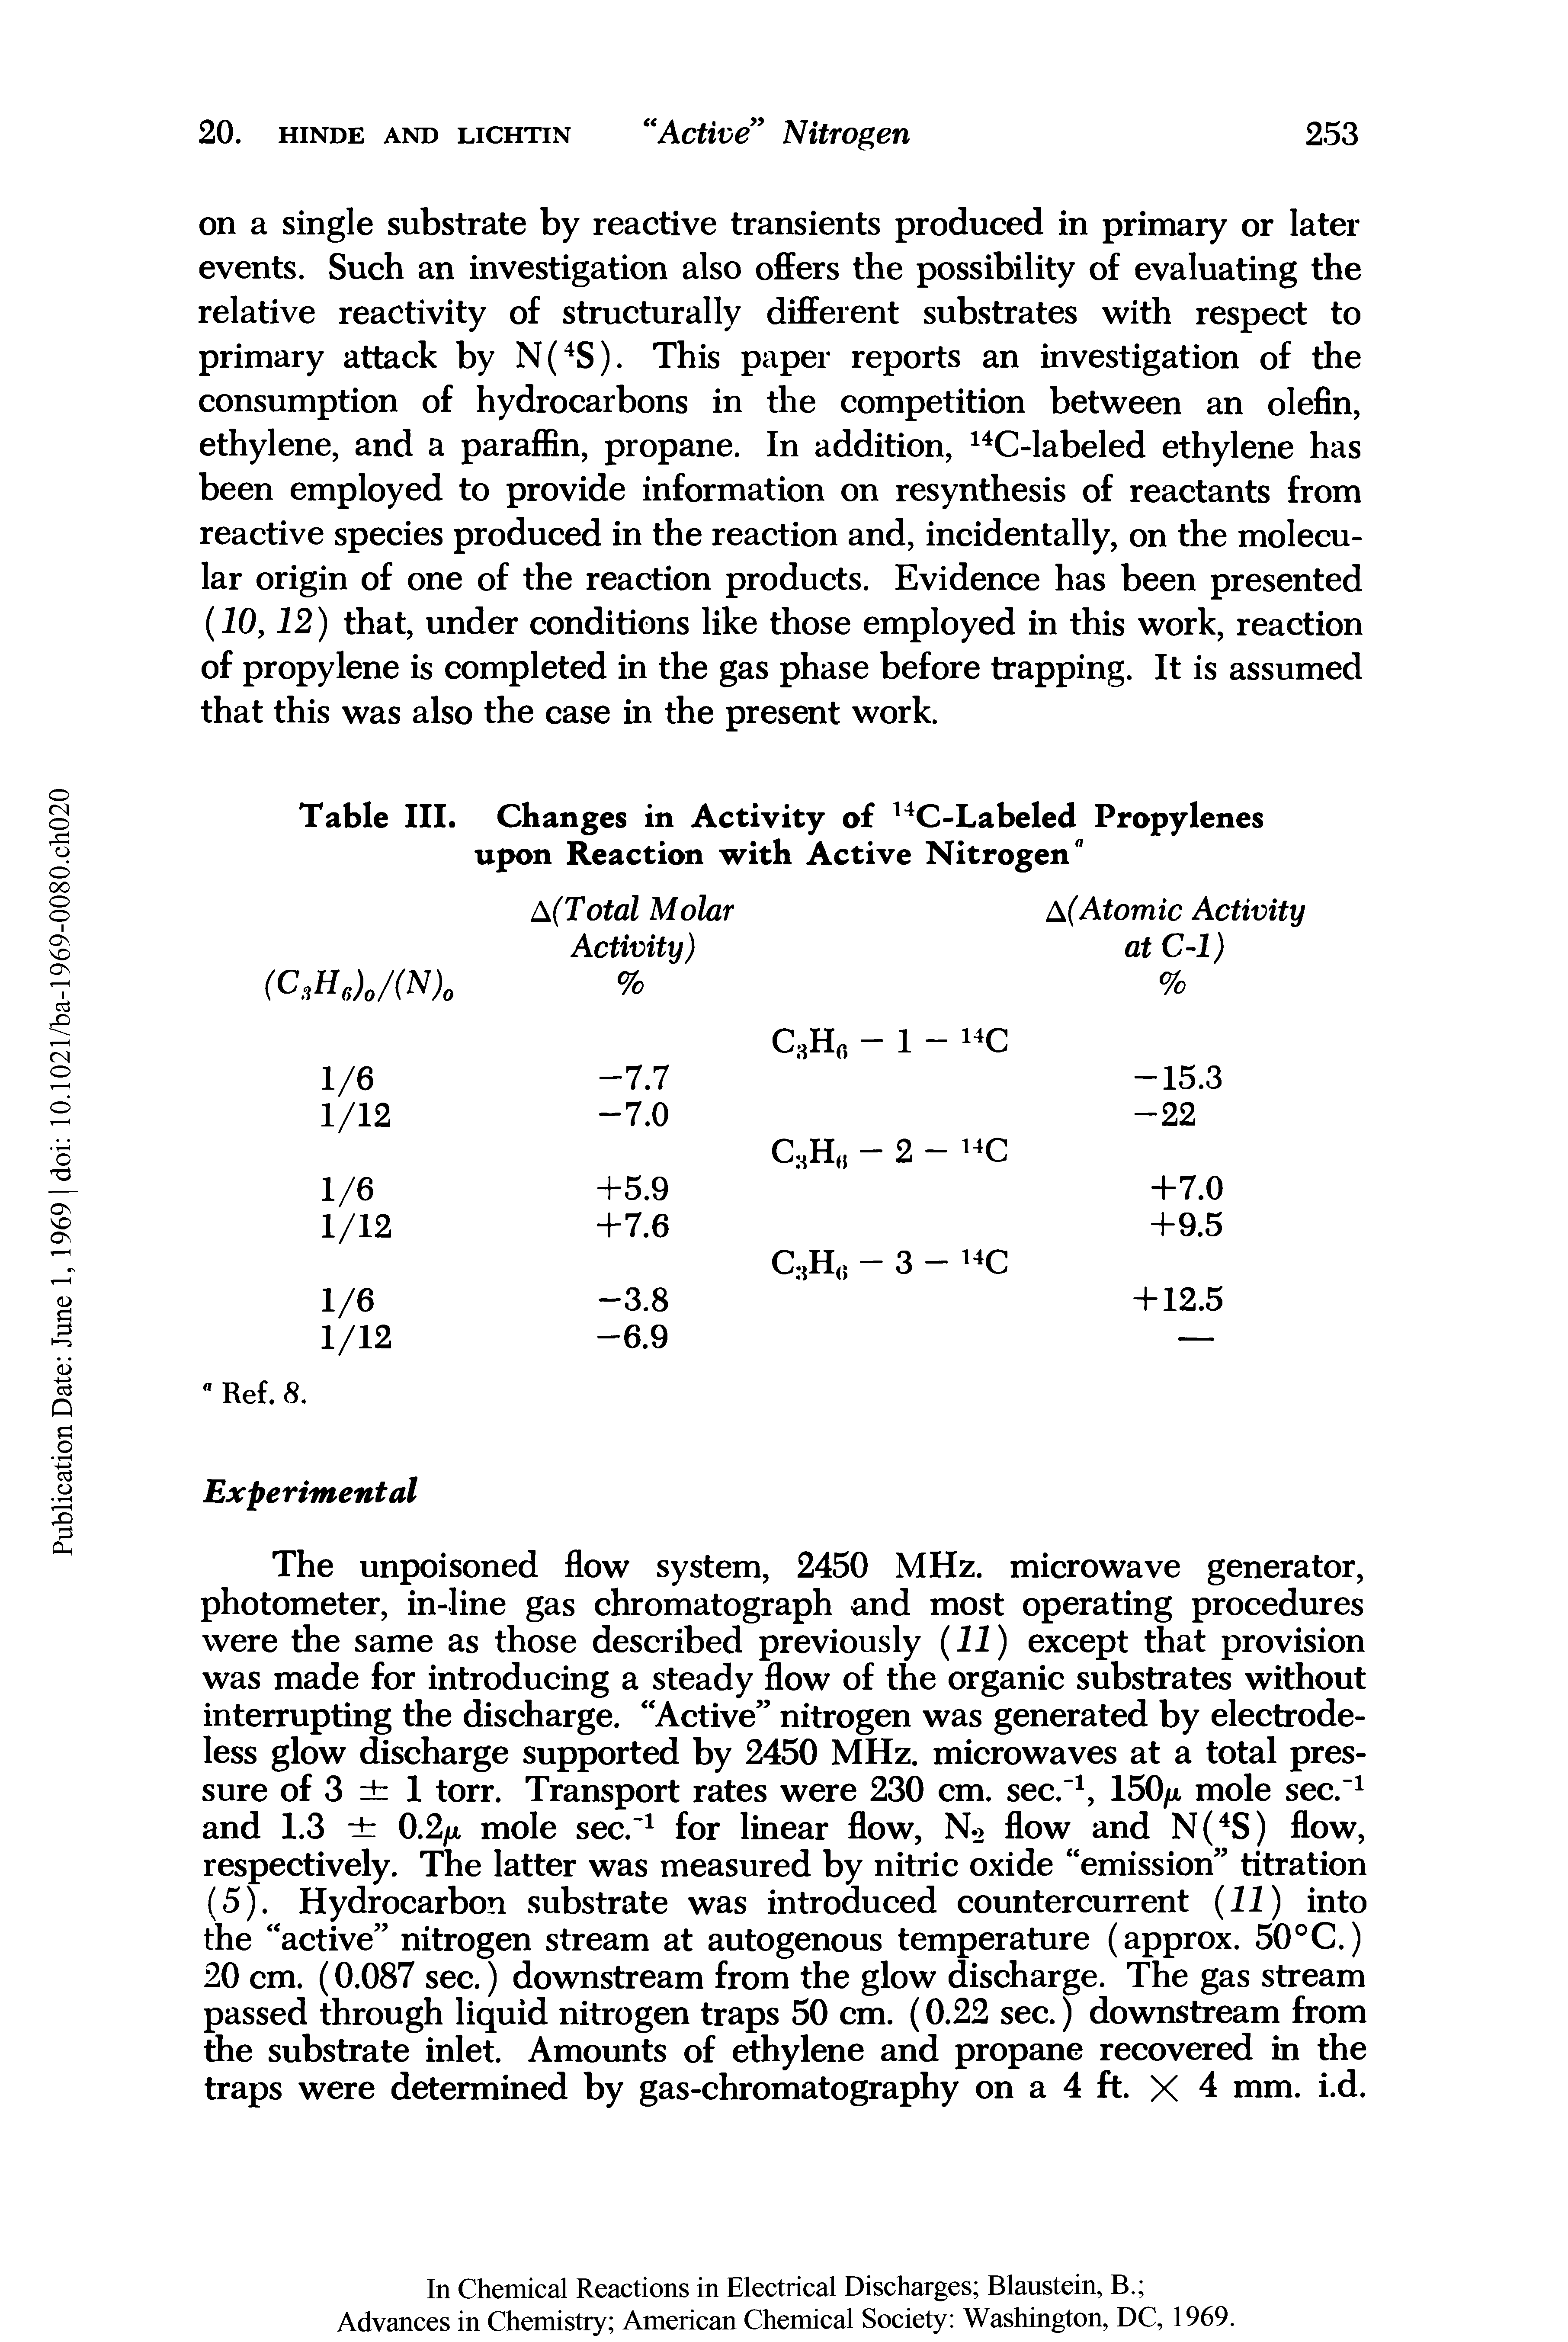 Table III. Changes in Activity of 14C-Labeled Propylenes upon Reaction with Active Nitrogen ...